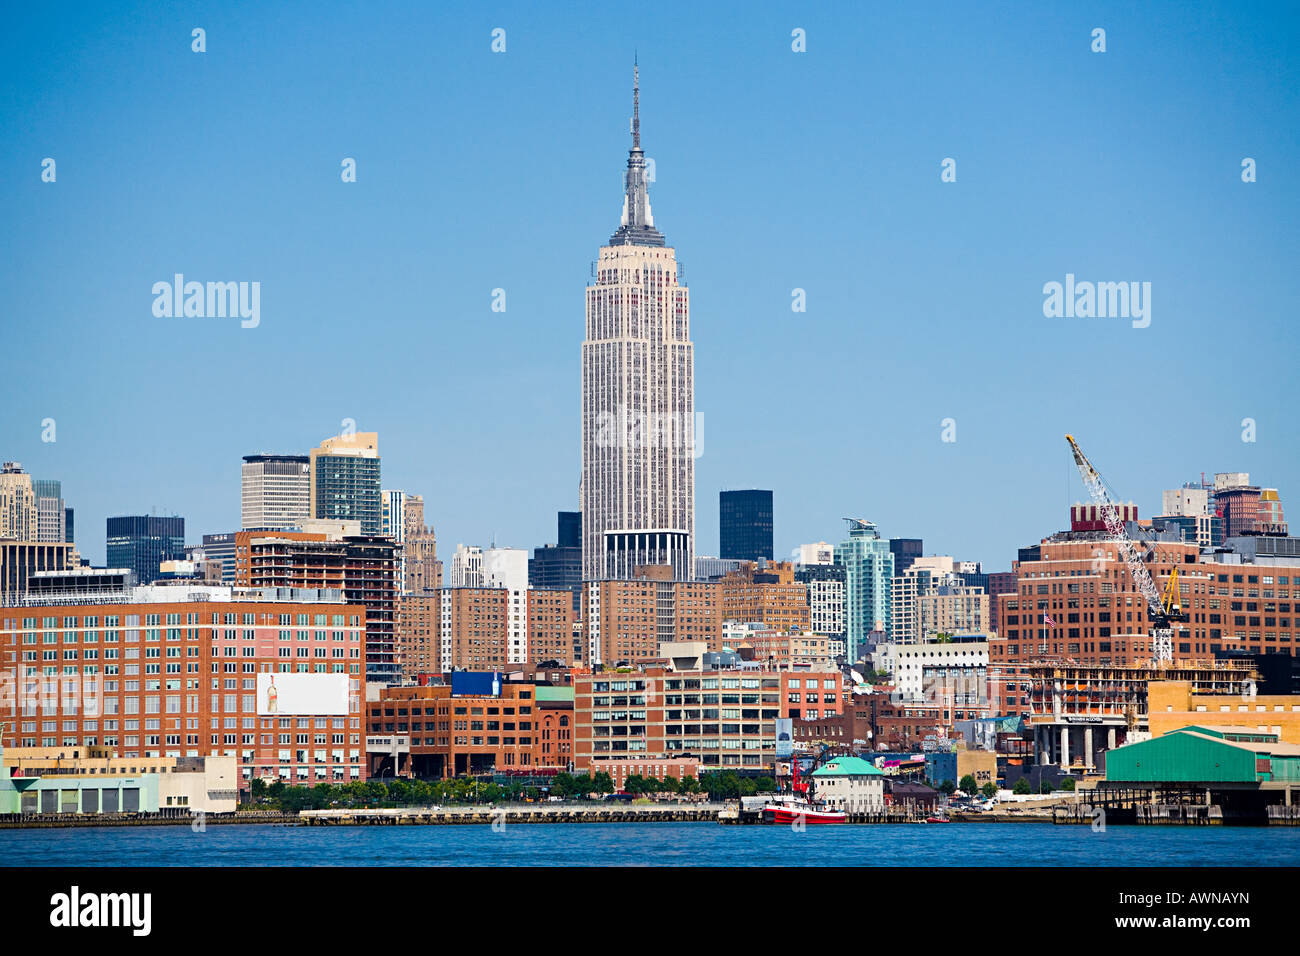 New york skyline with empire state building Stock Photo